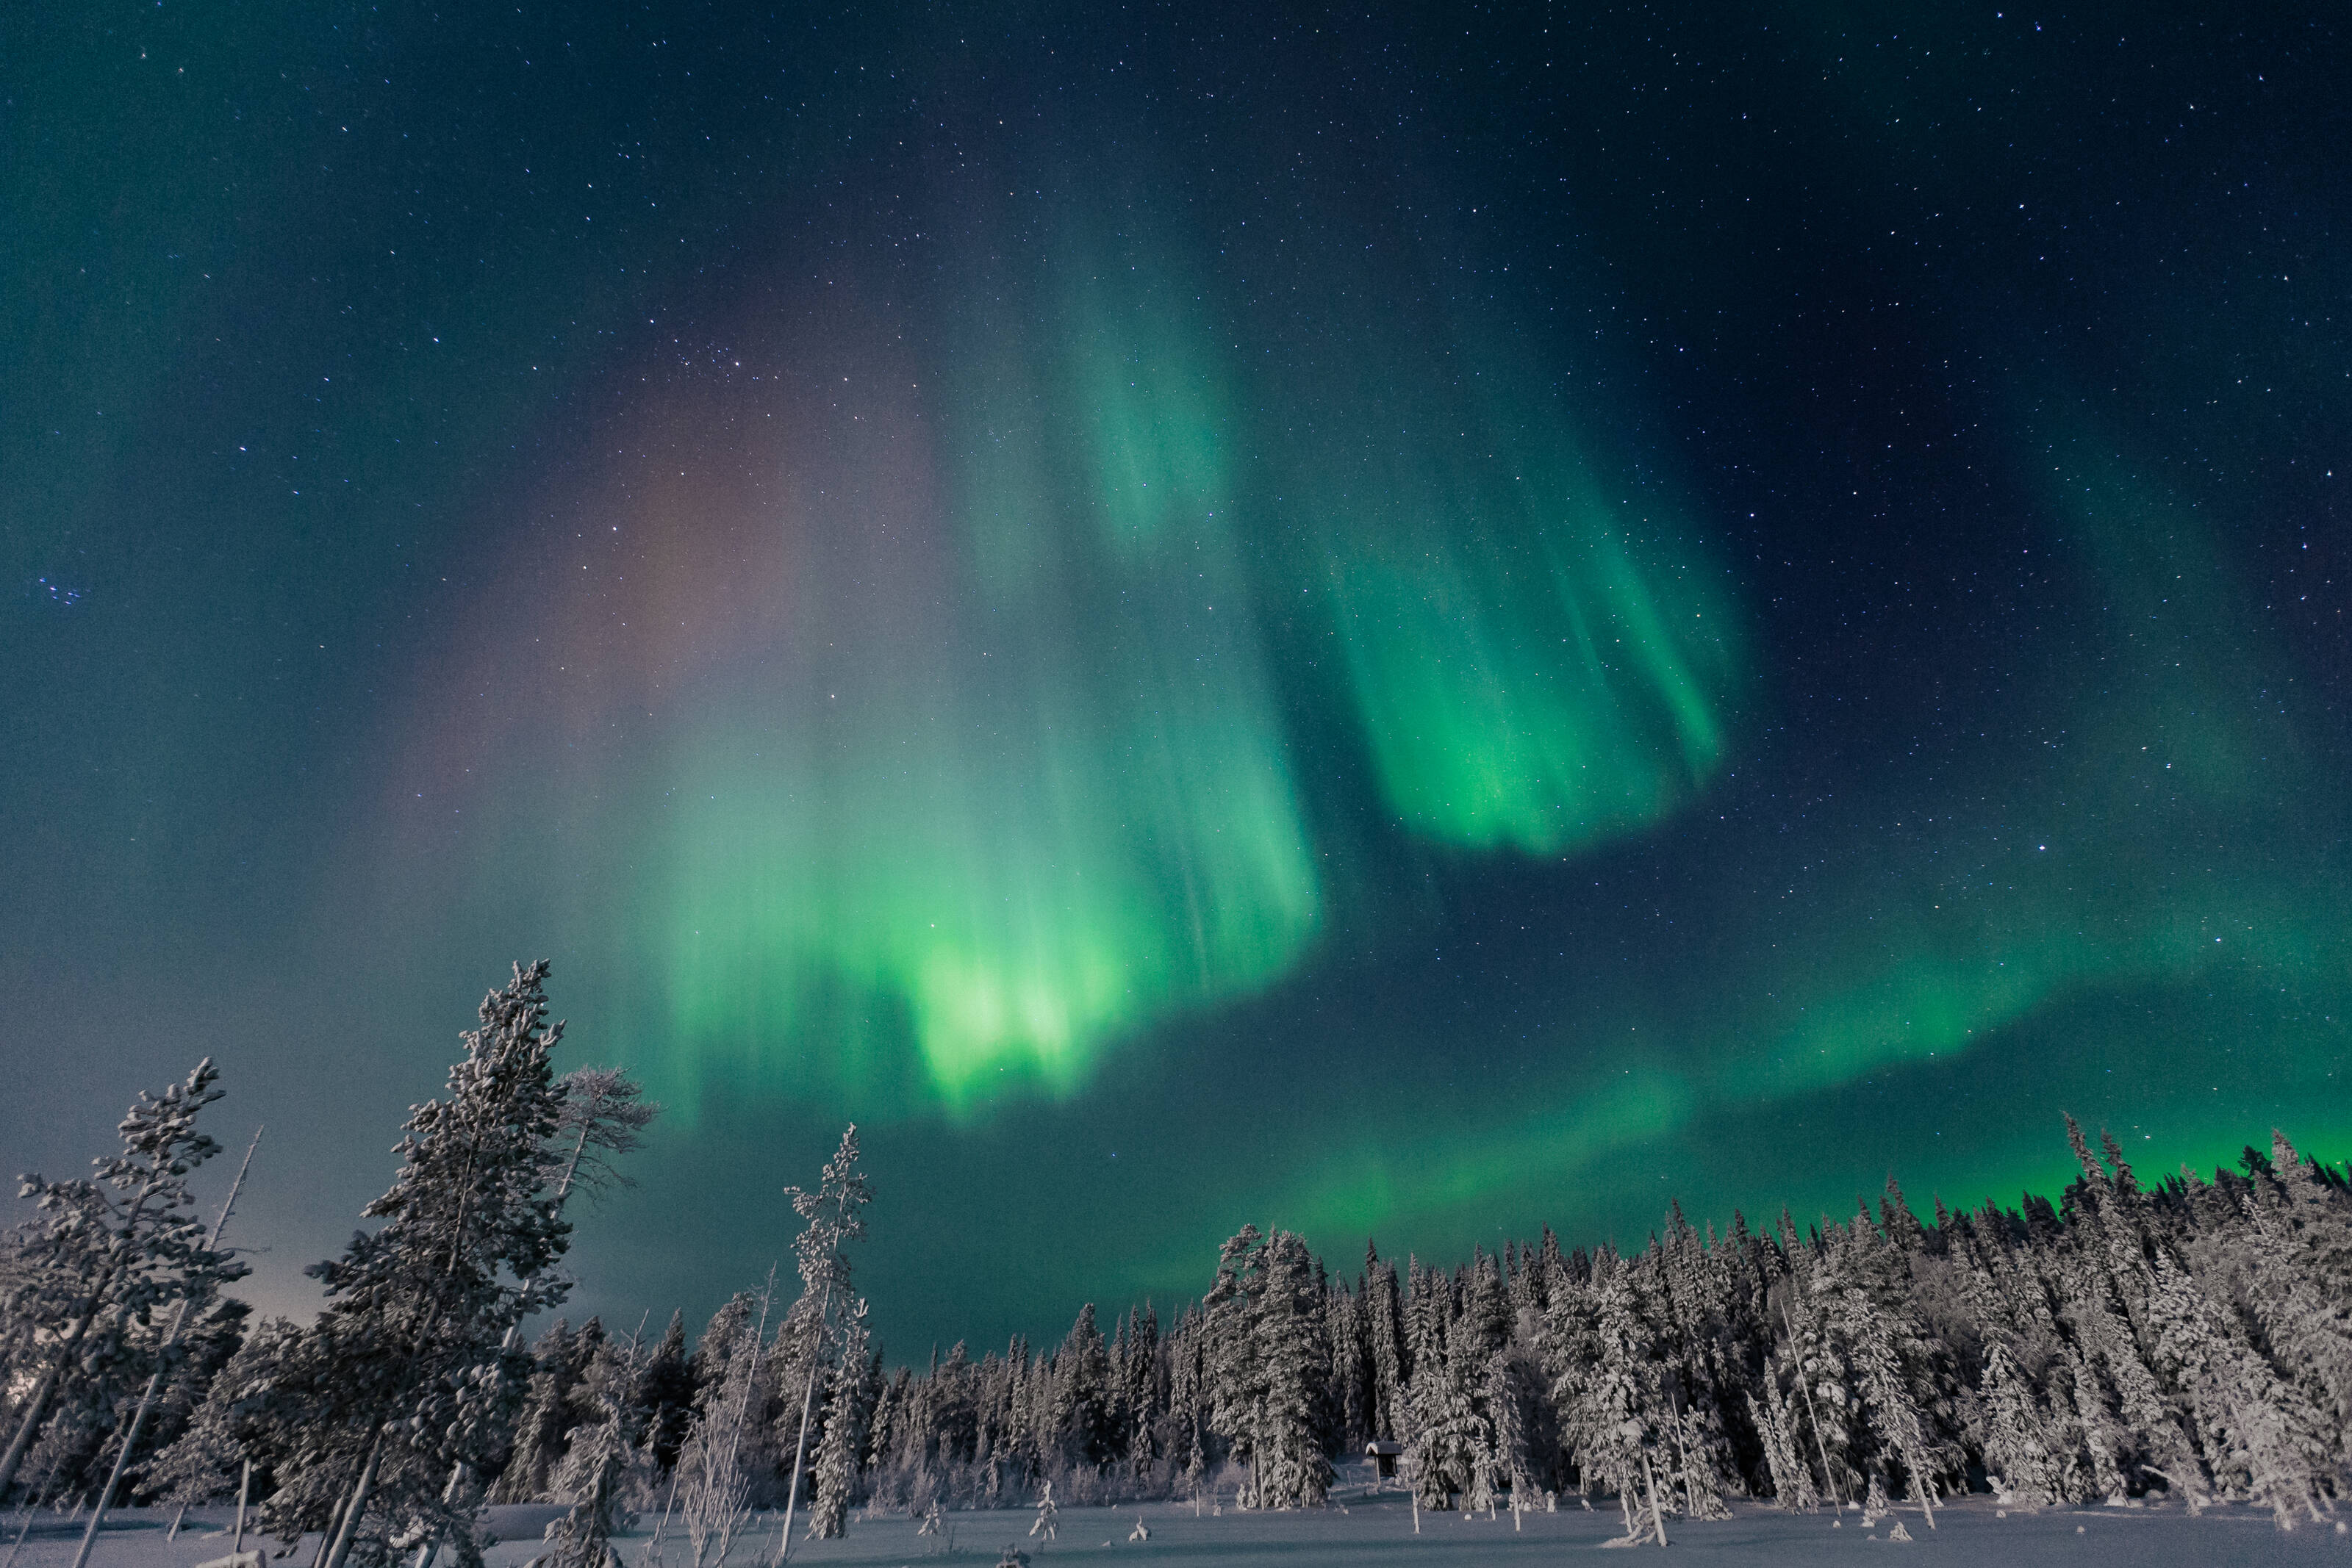 Best tips on how to see the northern lights in Finland